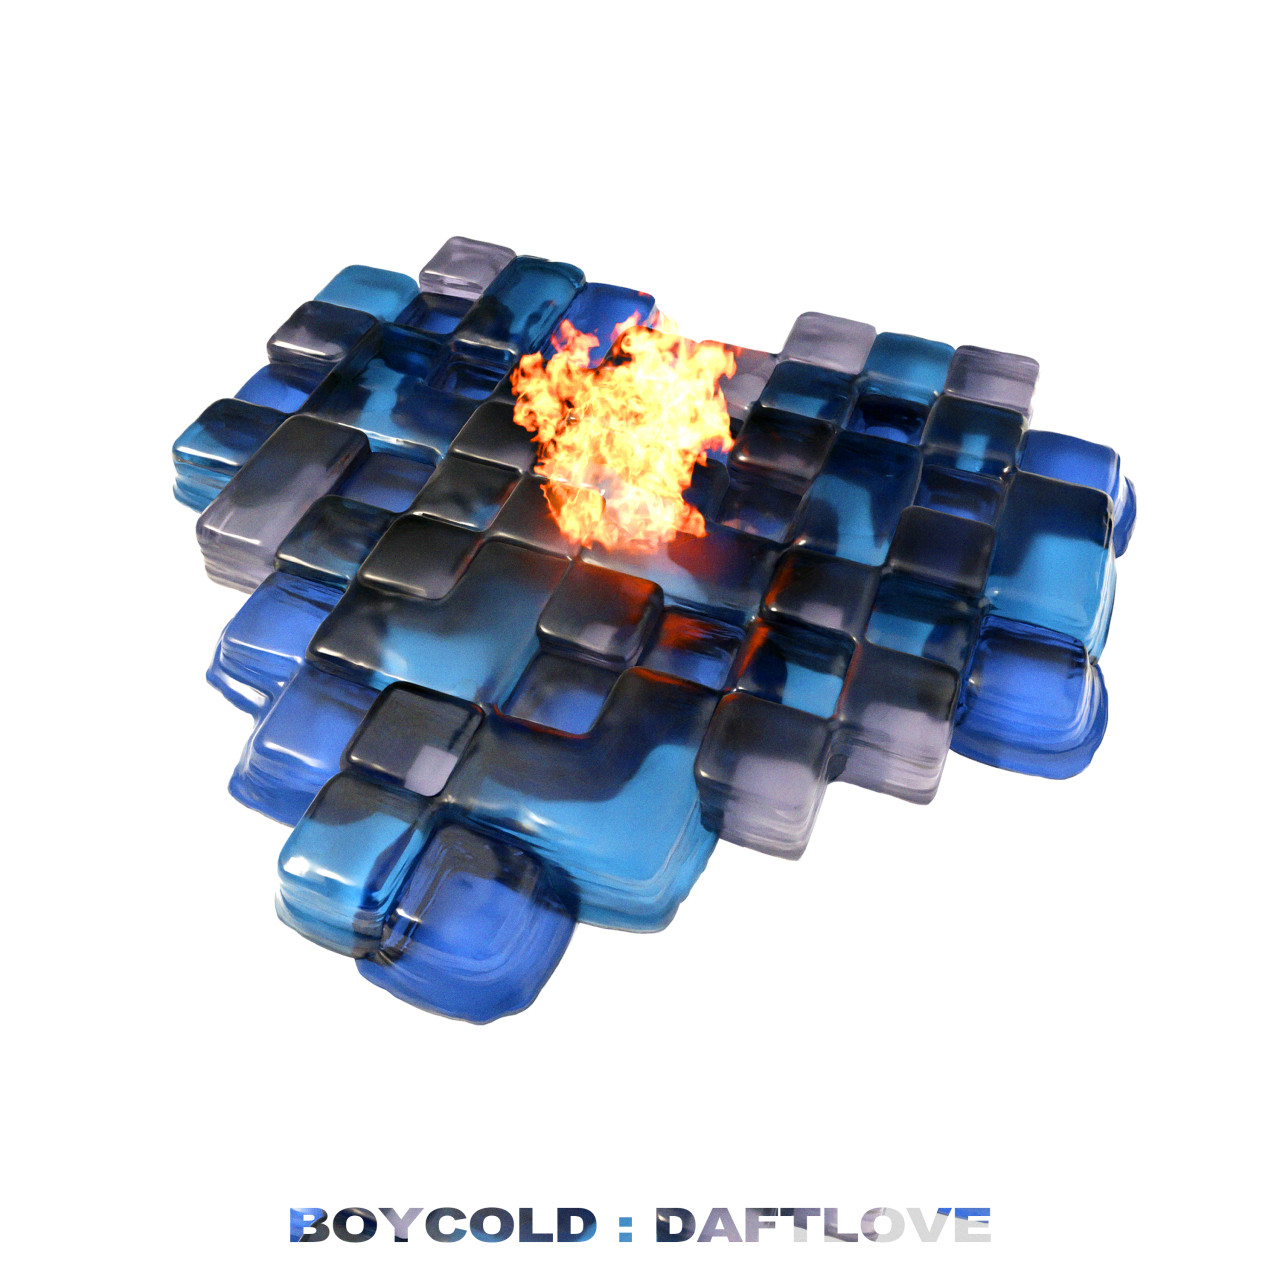 Album cover of Boycold’s first LP “Daft Love” (Sony Music Entertainment Korea)